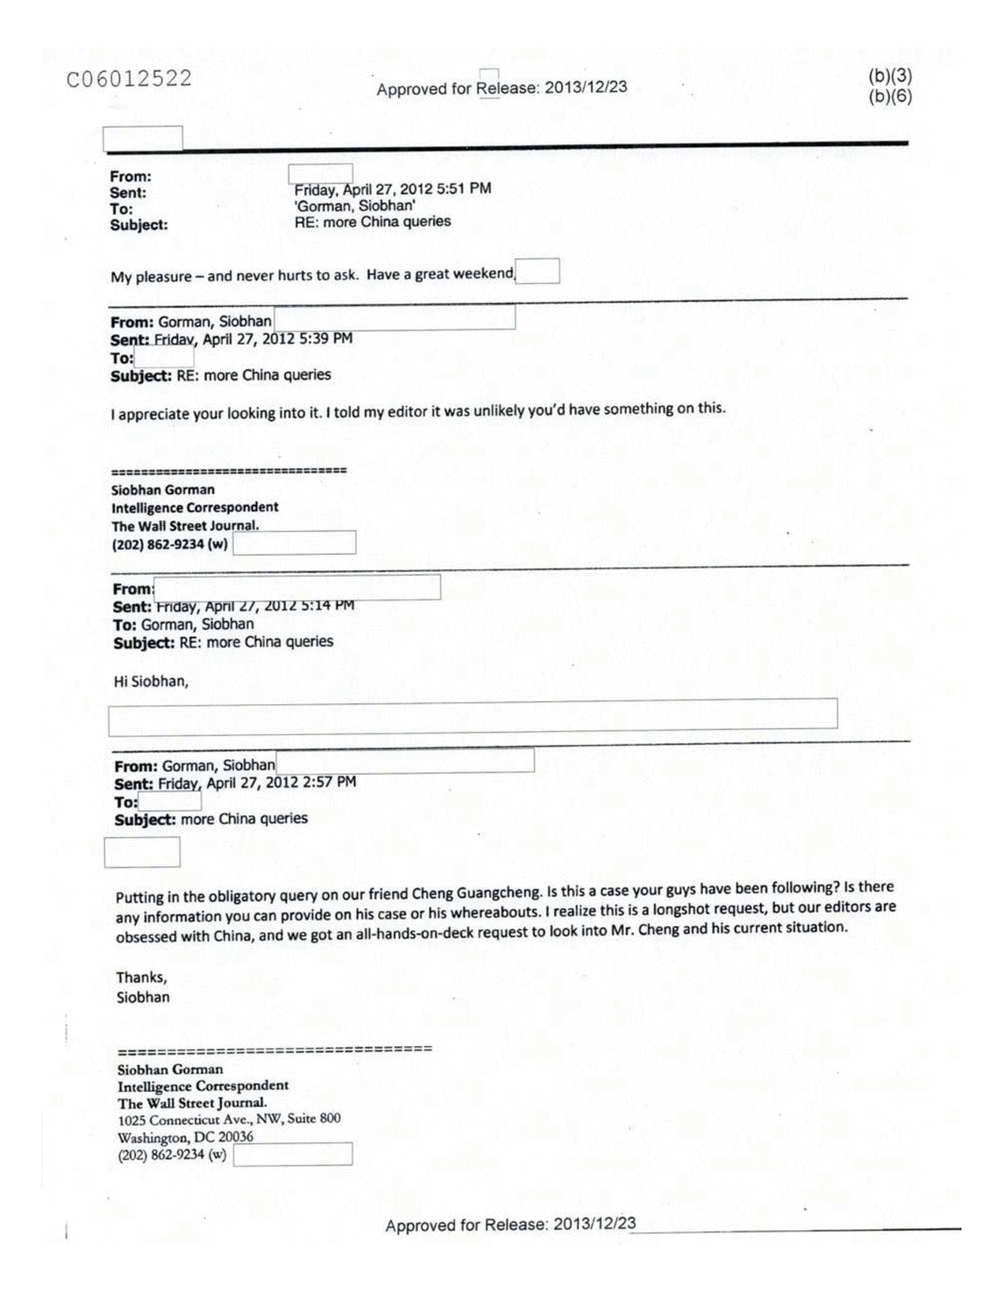 Page 43 from Email Correspondence Between Reporters and CIA Flacks